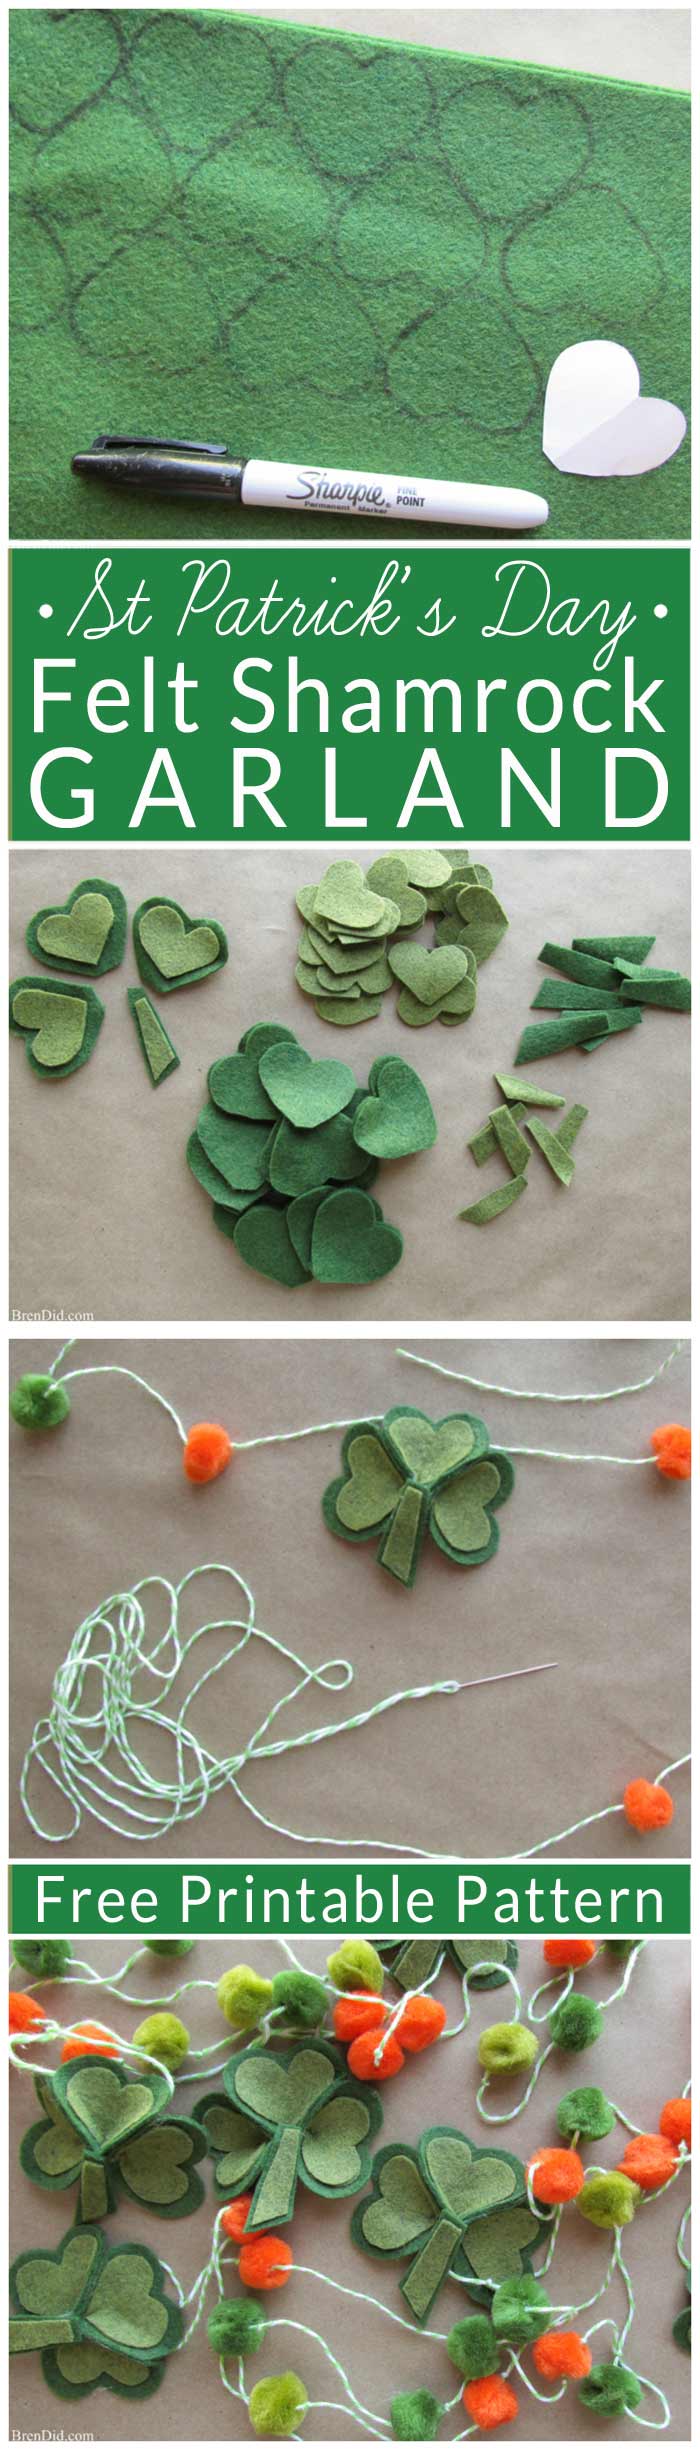 Make a fun and easy St. Patrick’s Day Shamrock garland using felt, bakers twine and premade pom poms. Free printable pattern! 